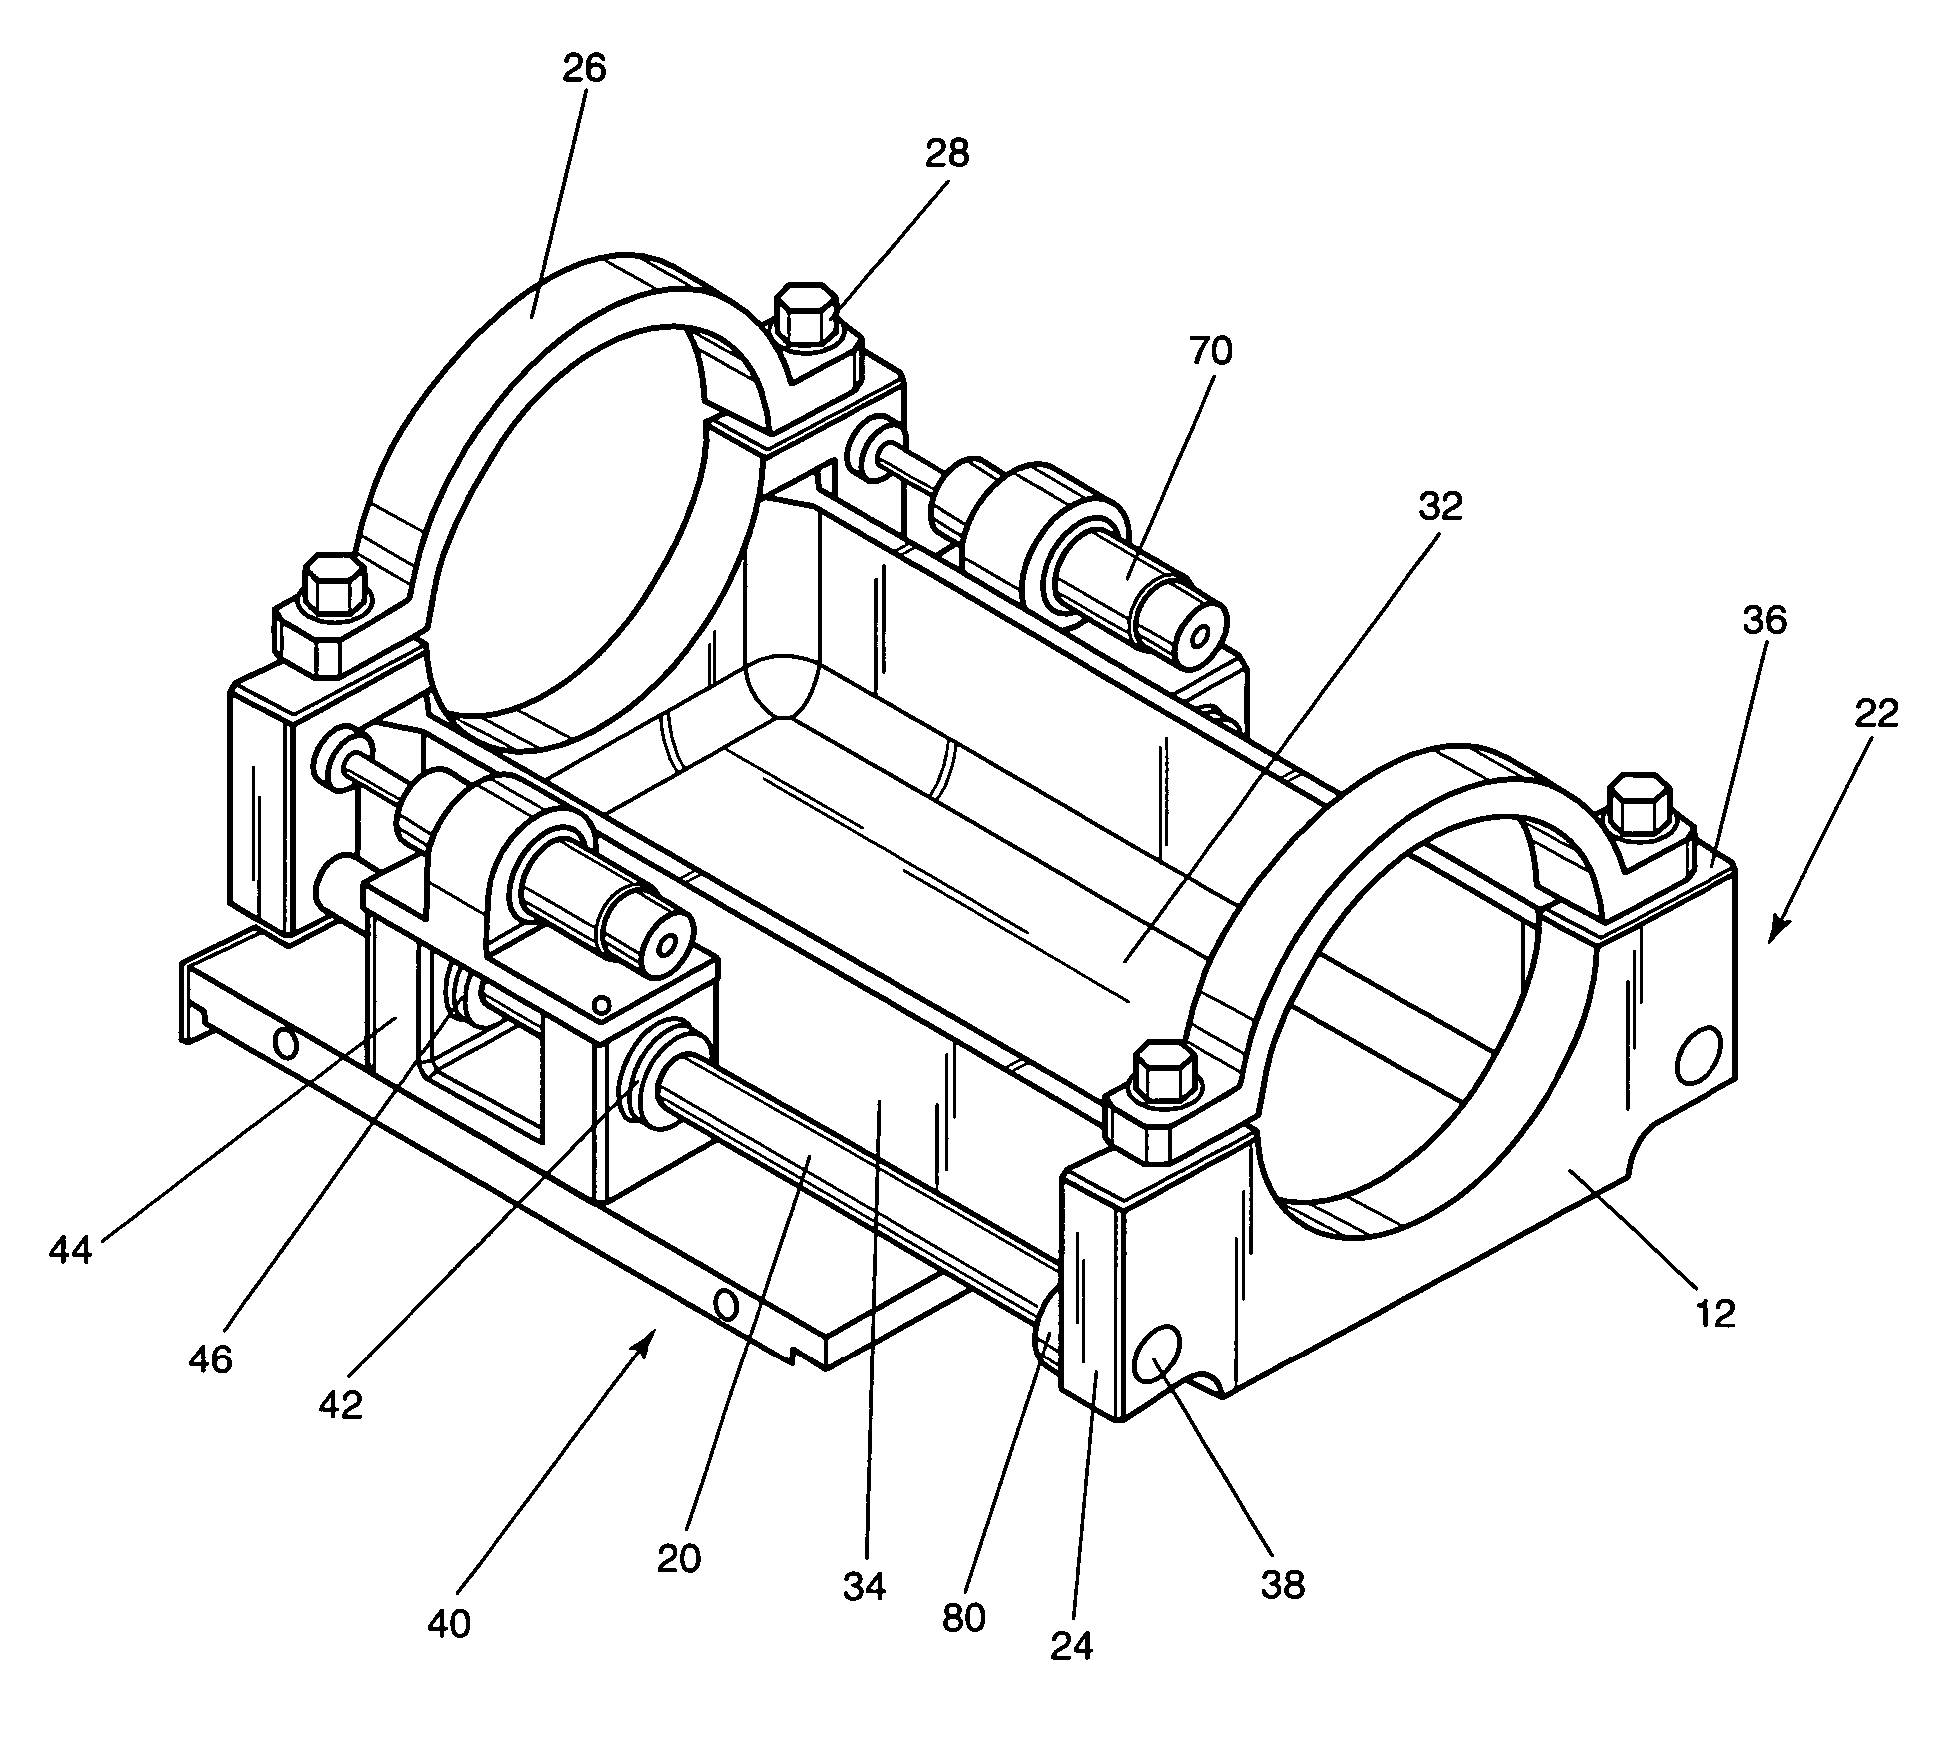 Pointing device inertial isolation and alignment mounting system